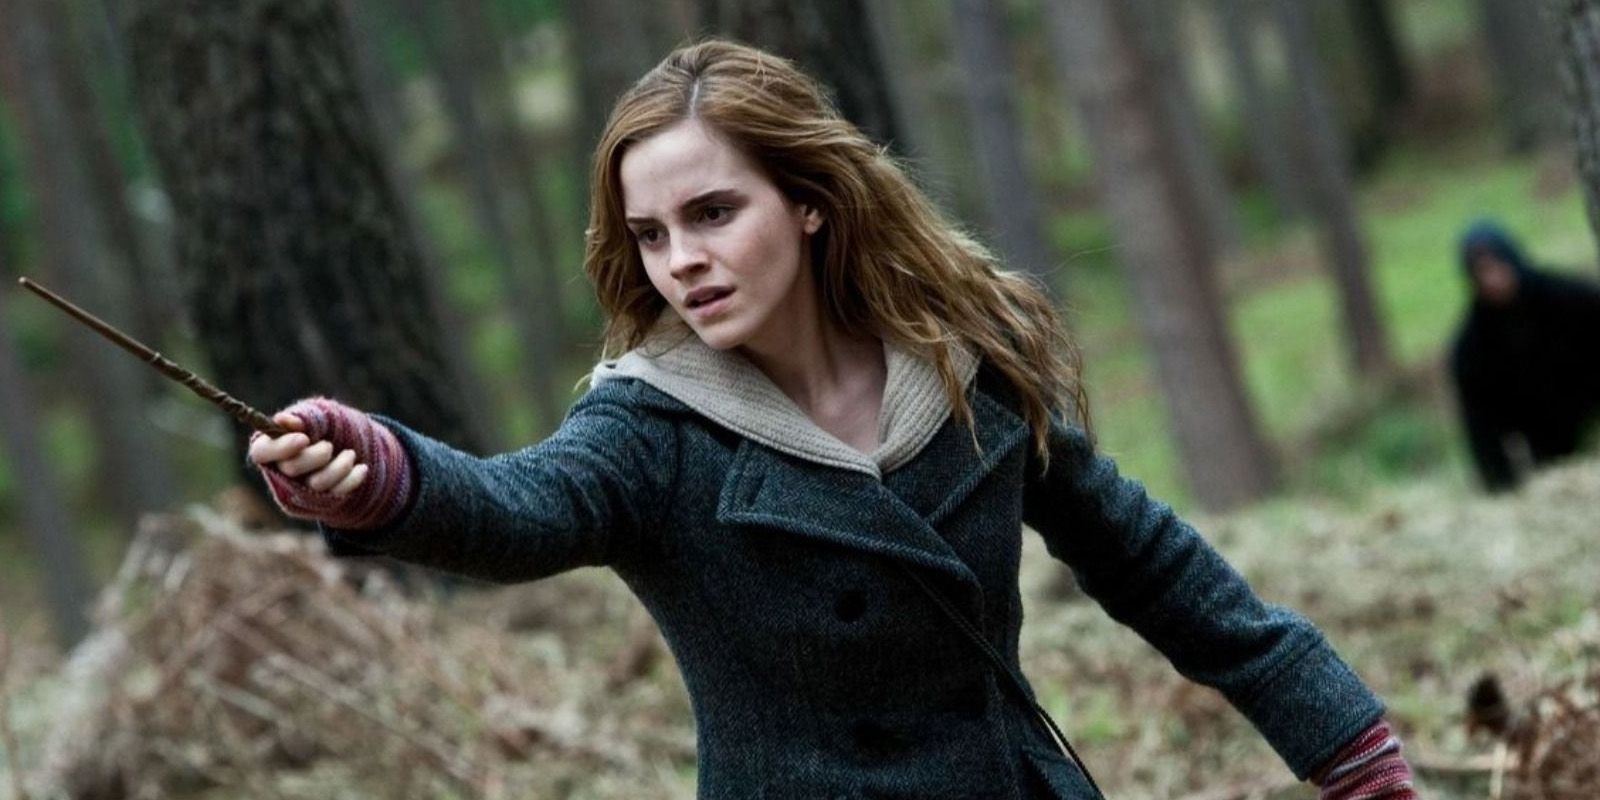 Emma Watson On The Famous Harry Potter Scene That Made Her ' Uncomfortable'